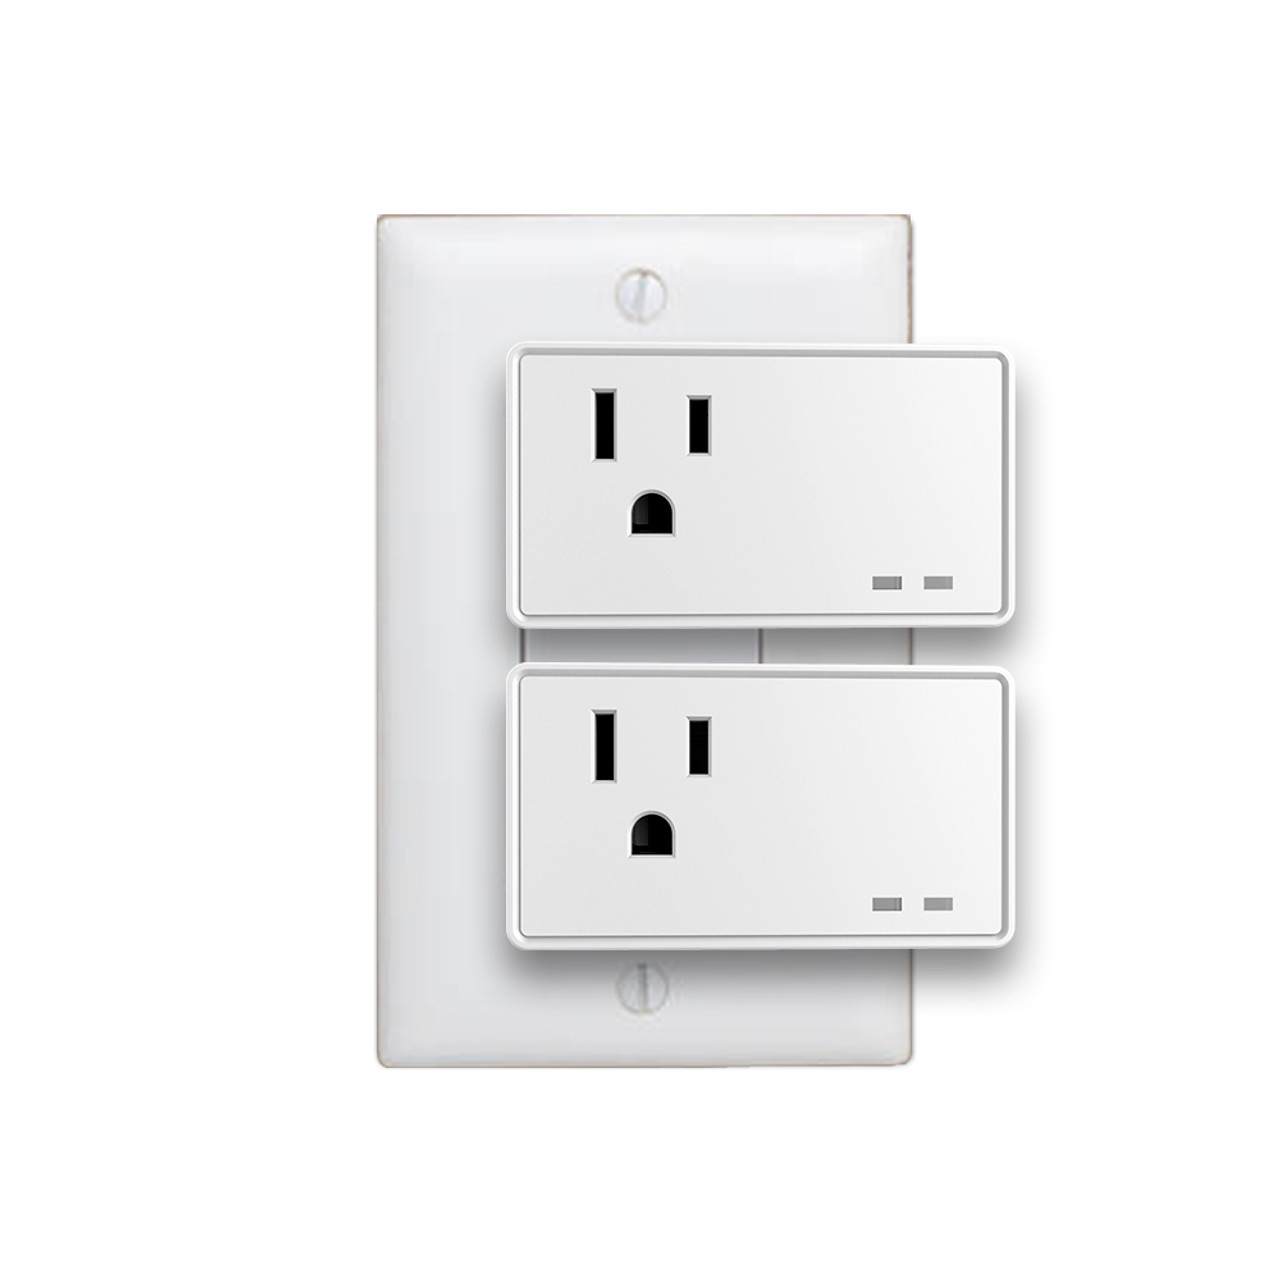 Smart WiFi Mini Plug Outlet, Works with Alexa and Google Home